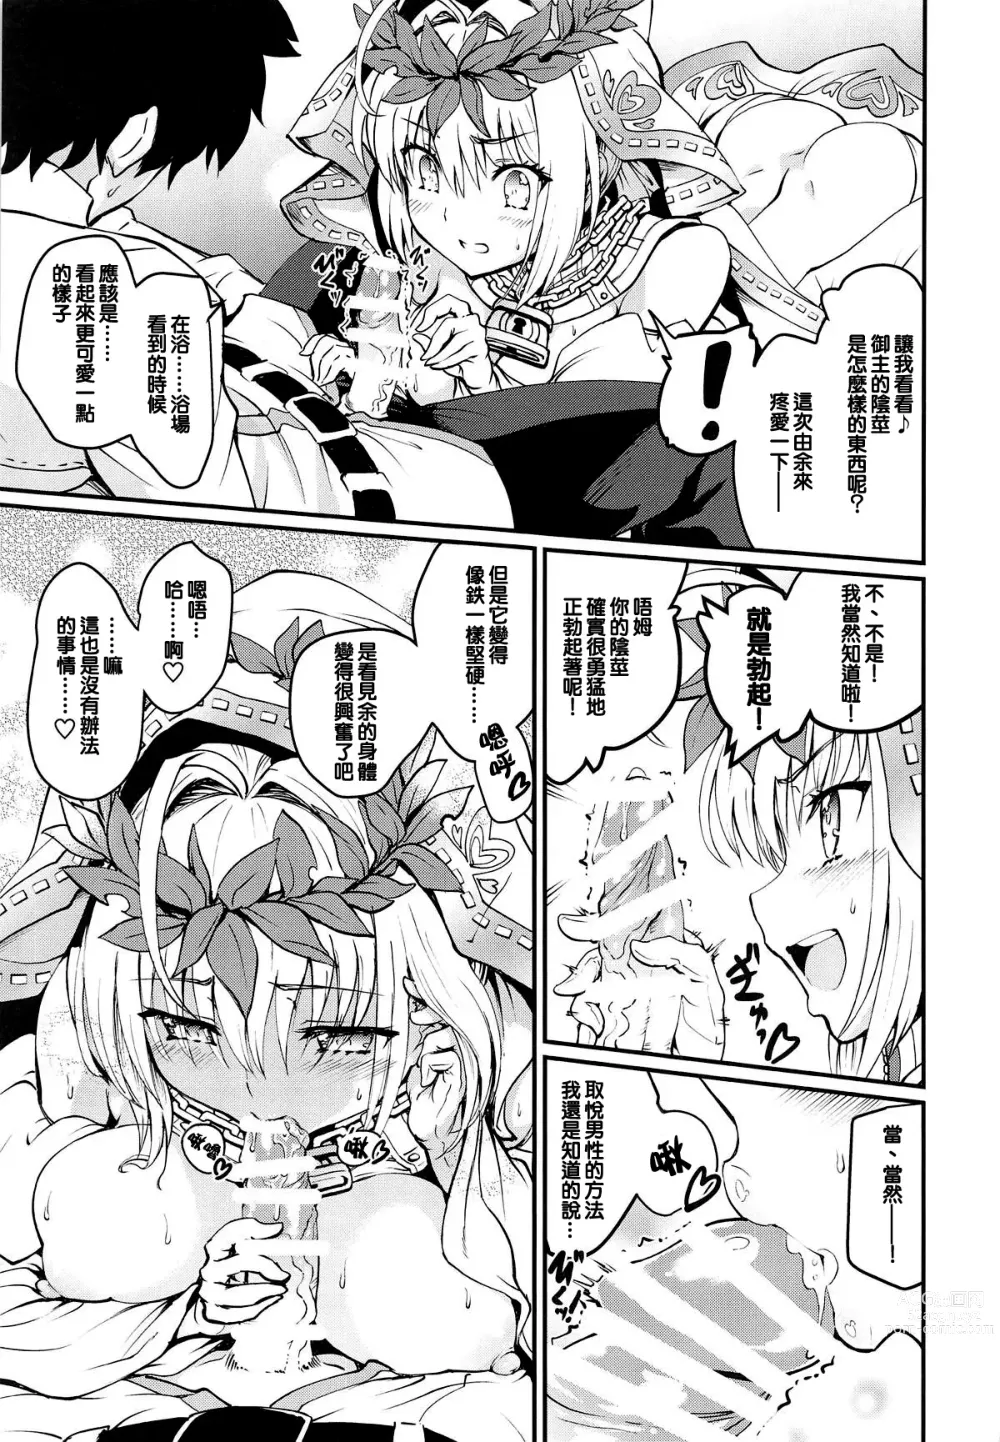 Page 8 of doujinshi 尼禄+尼禄!